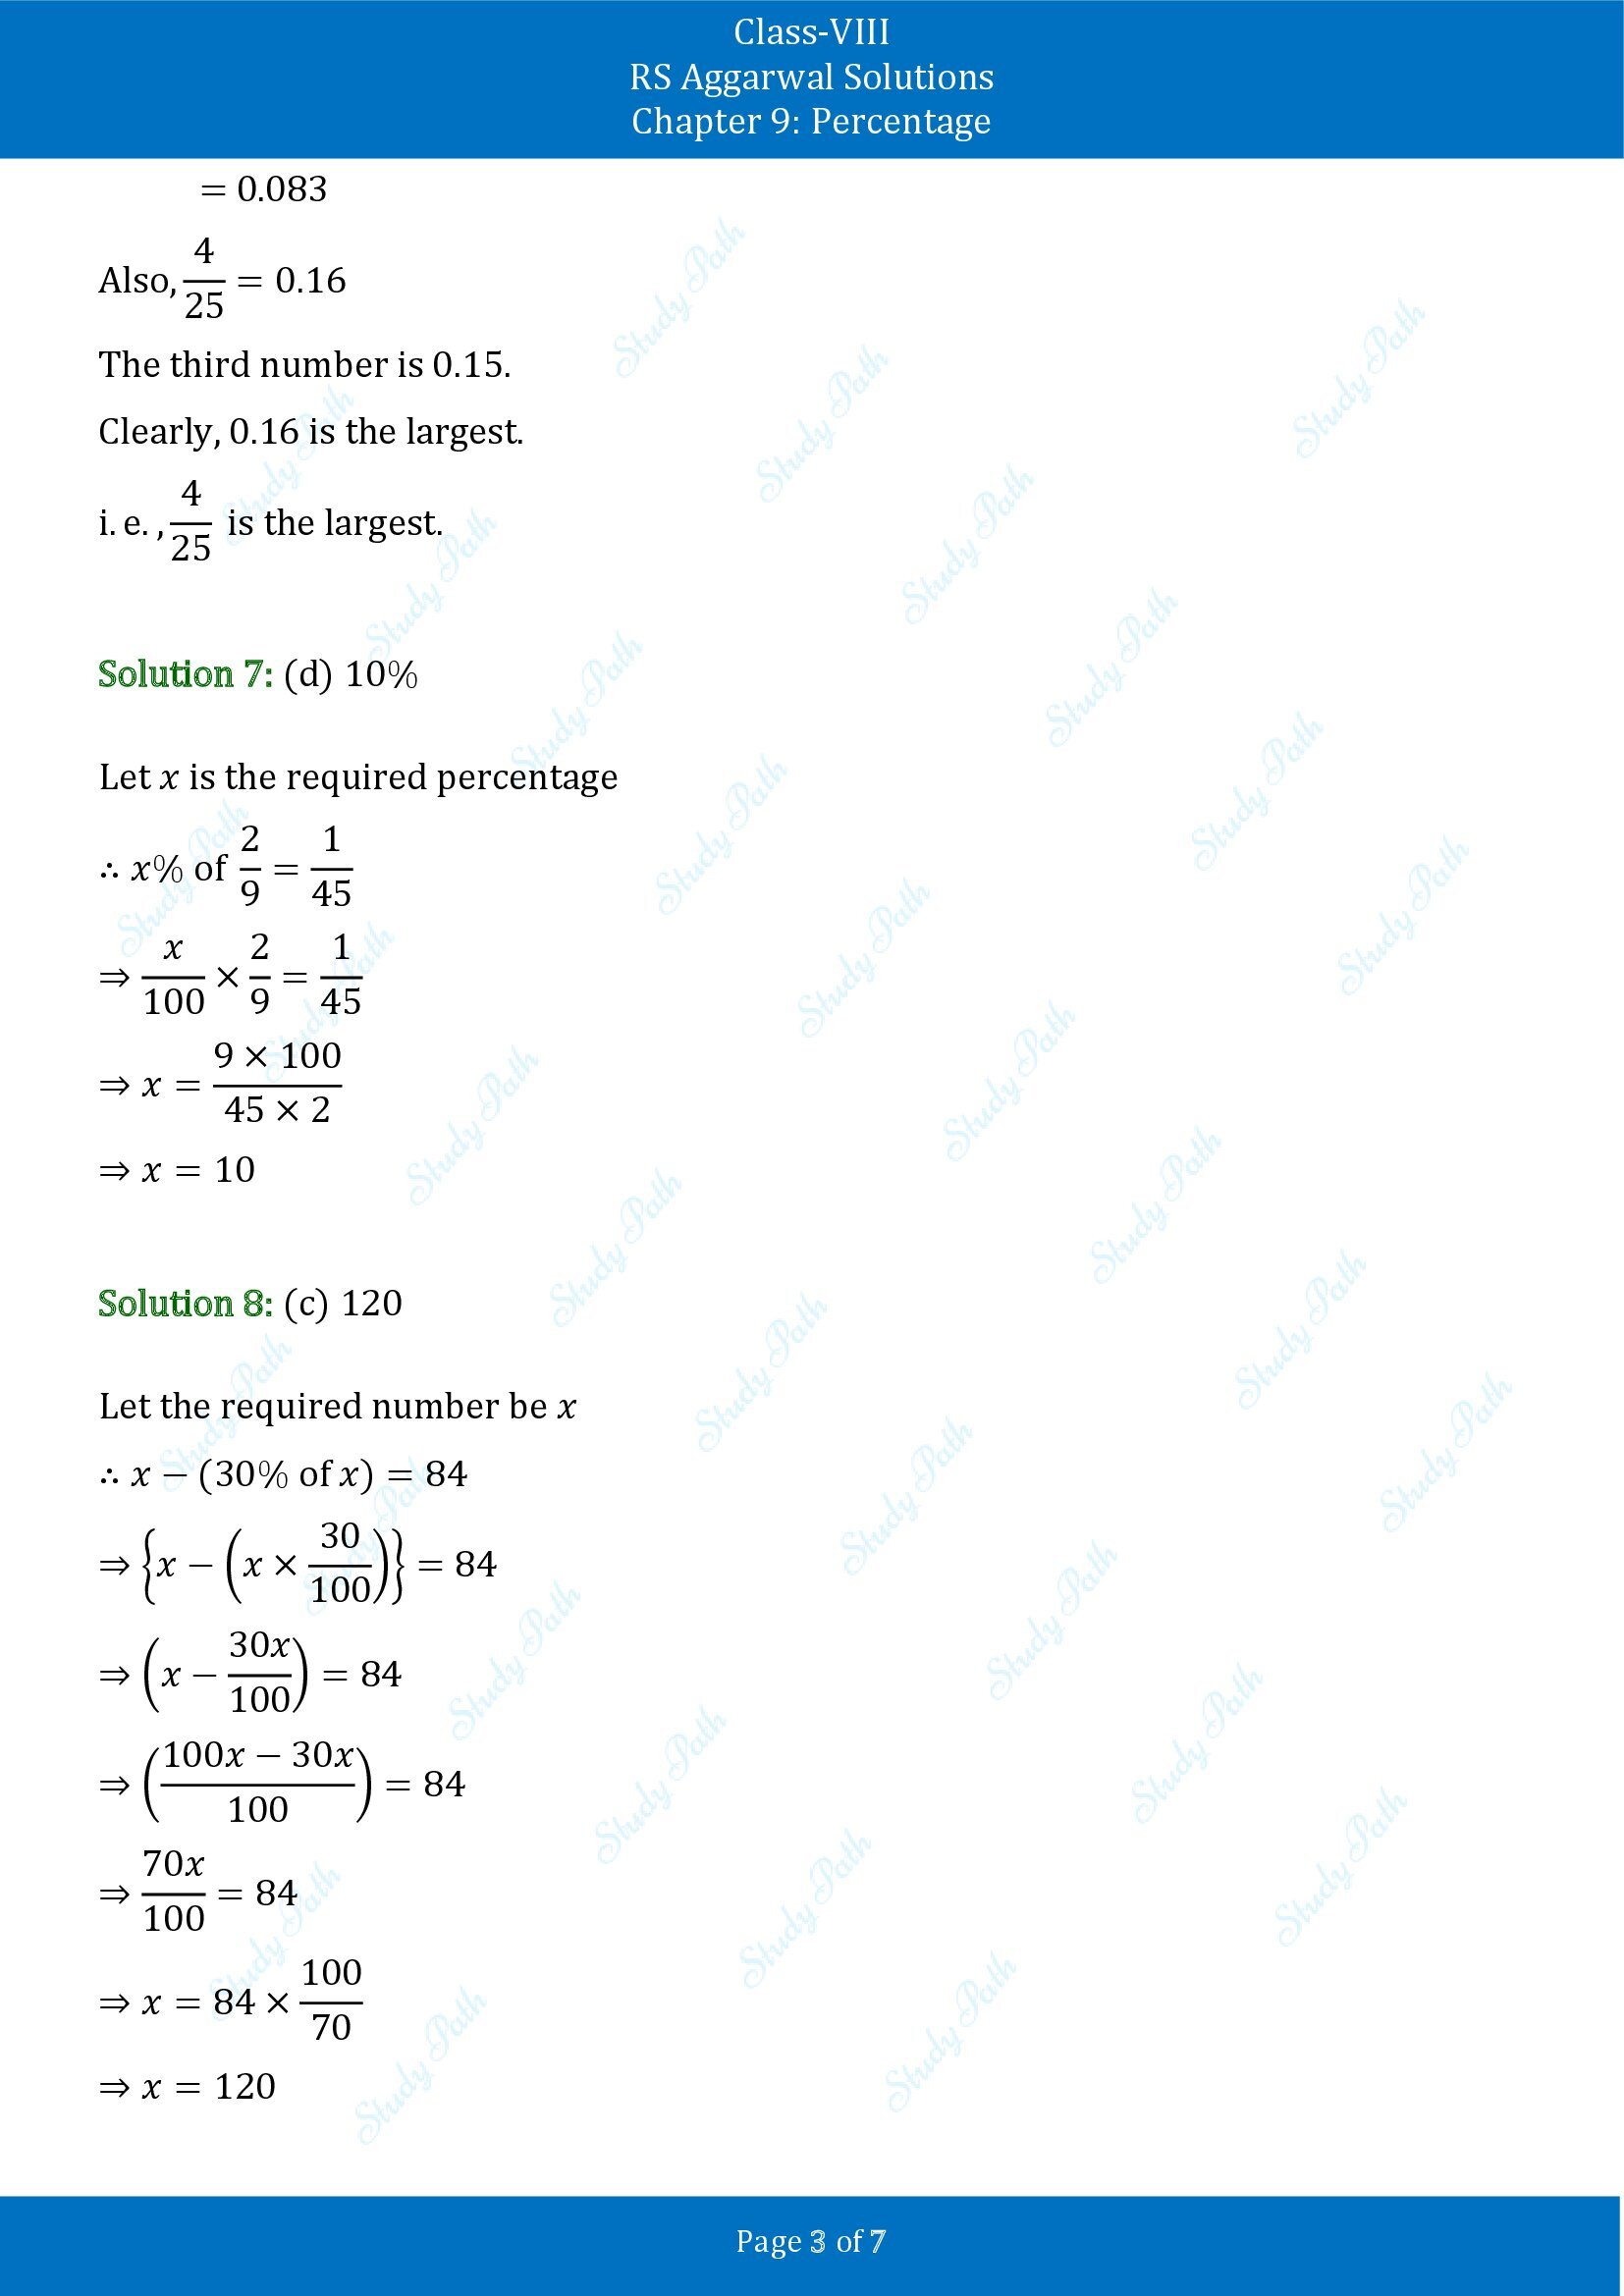 RS Aggarwal Solutions Class 8 Chapter 9 Percentage Test Paper 00003